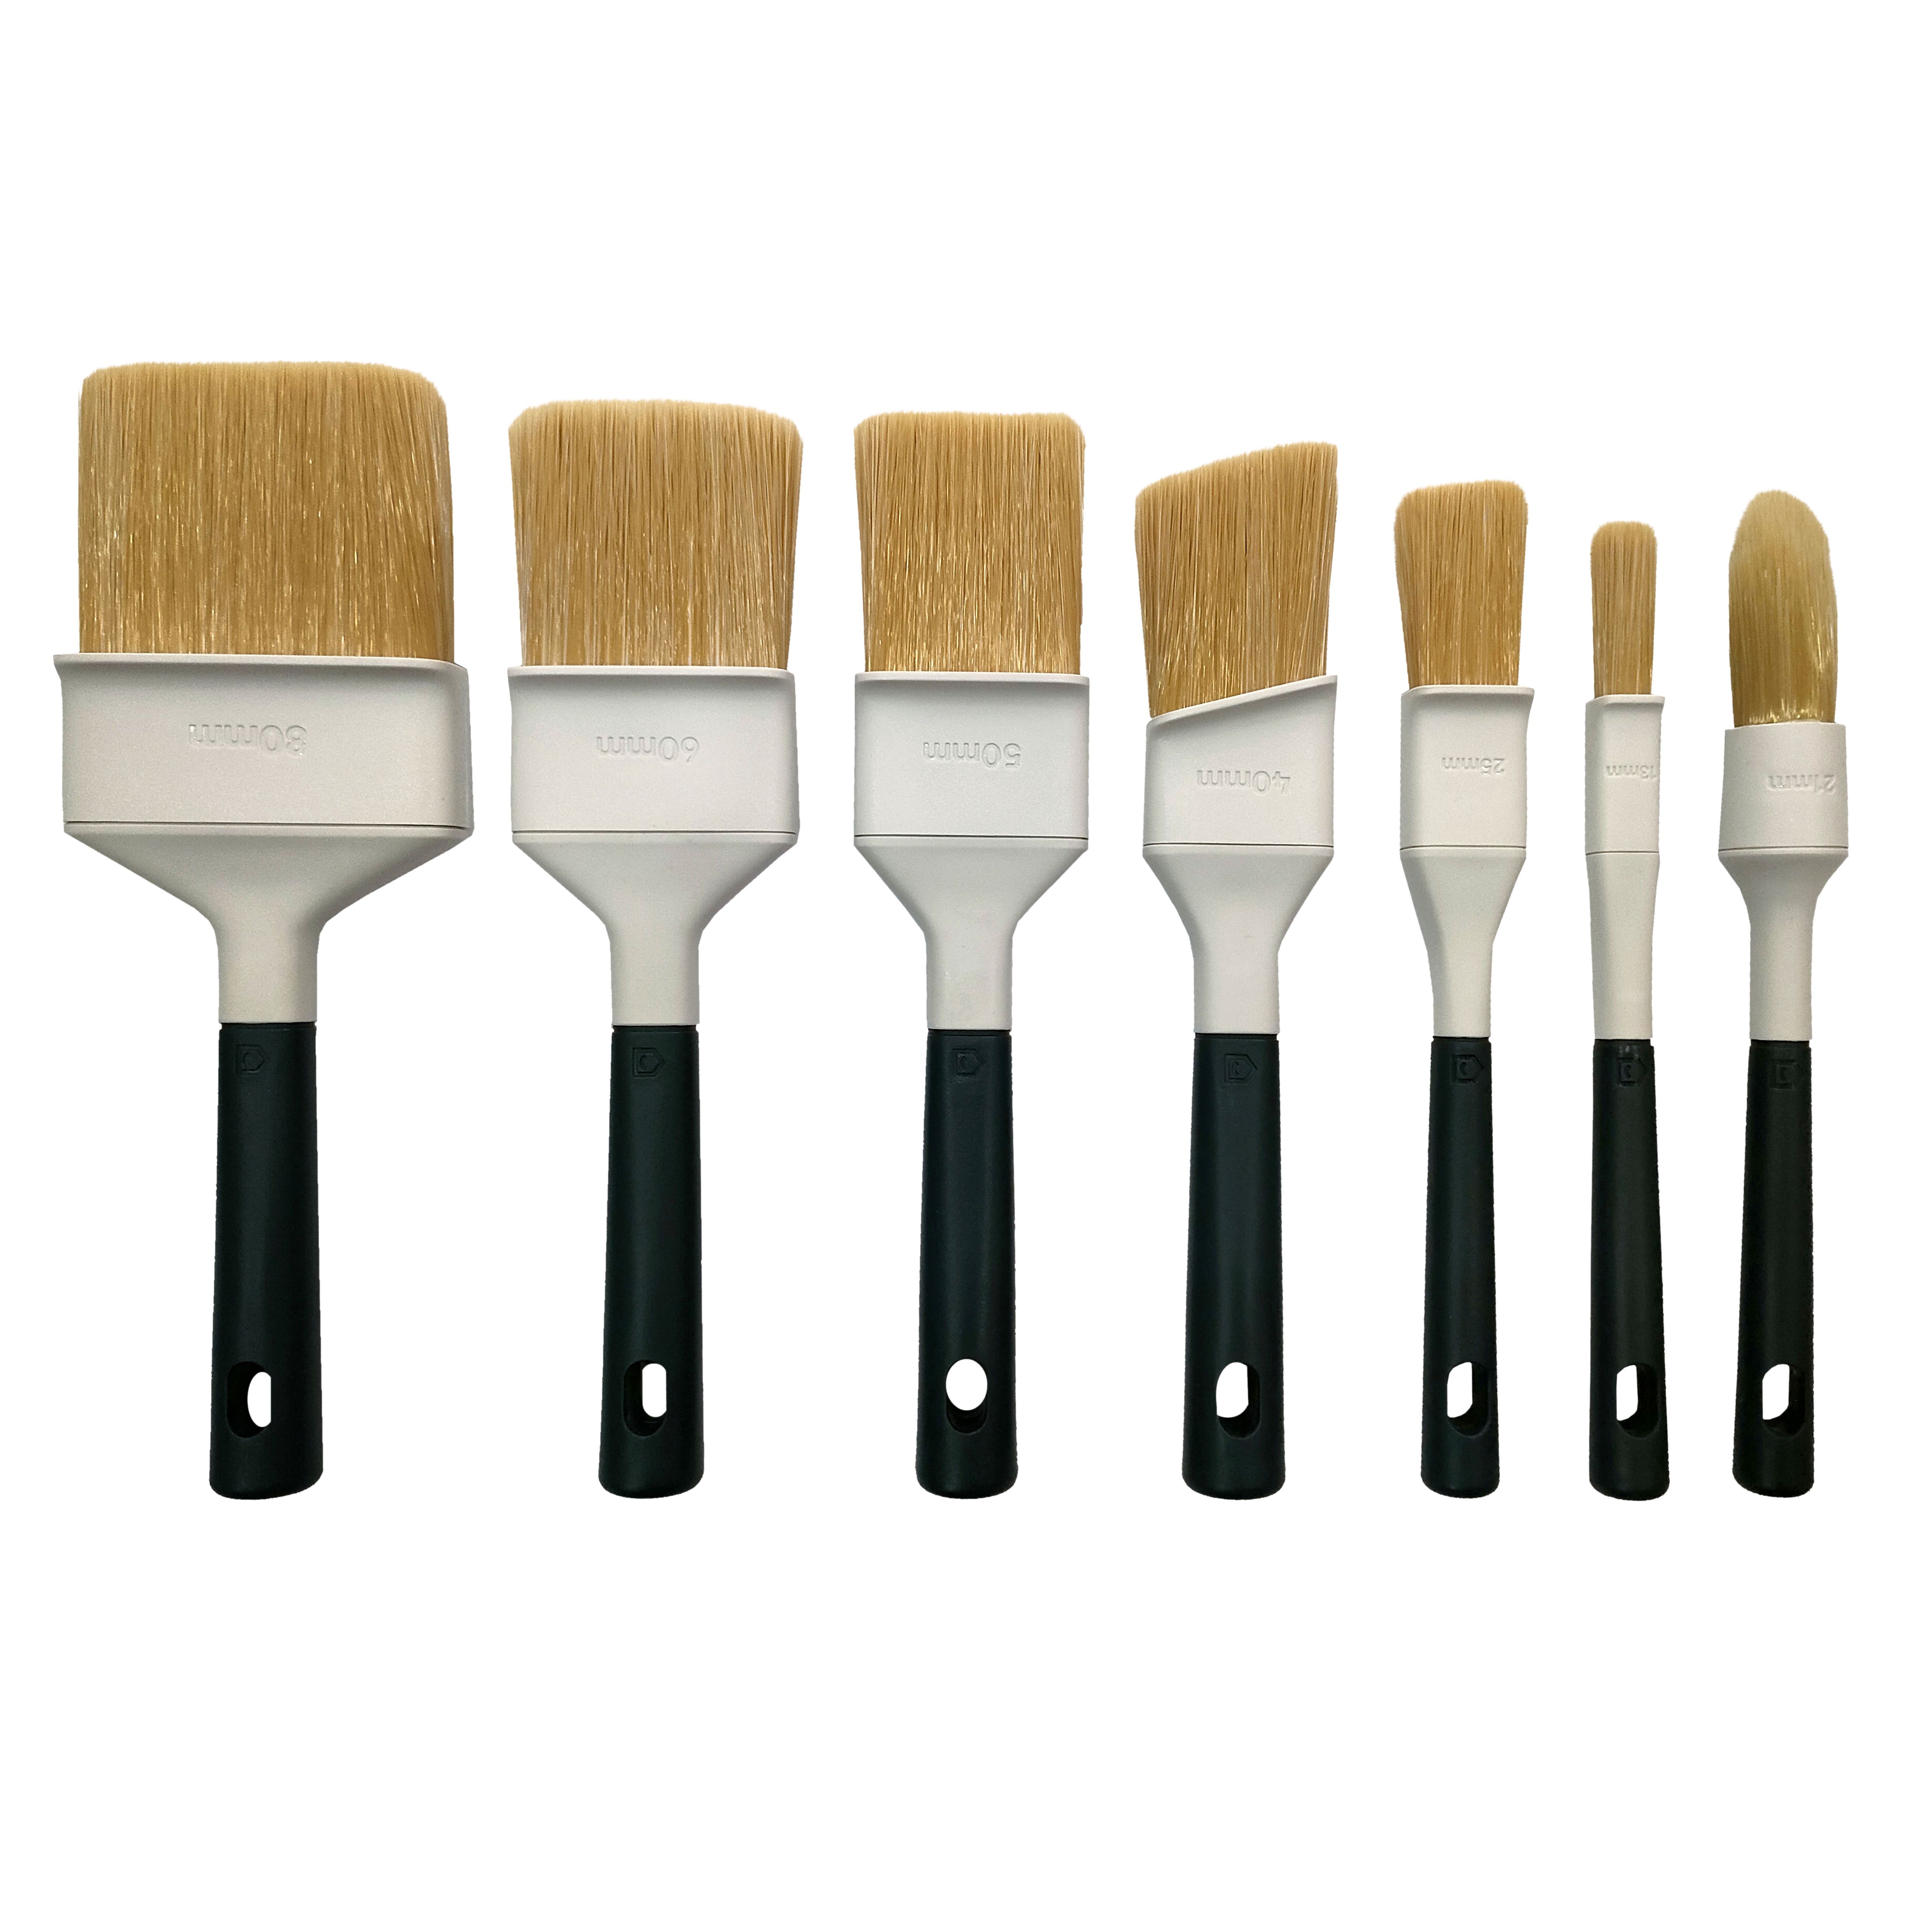 The Fine Touch, Value Paint Brush Set, 10 Paint Brushes